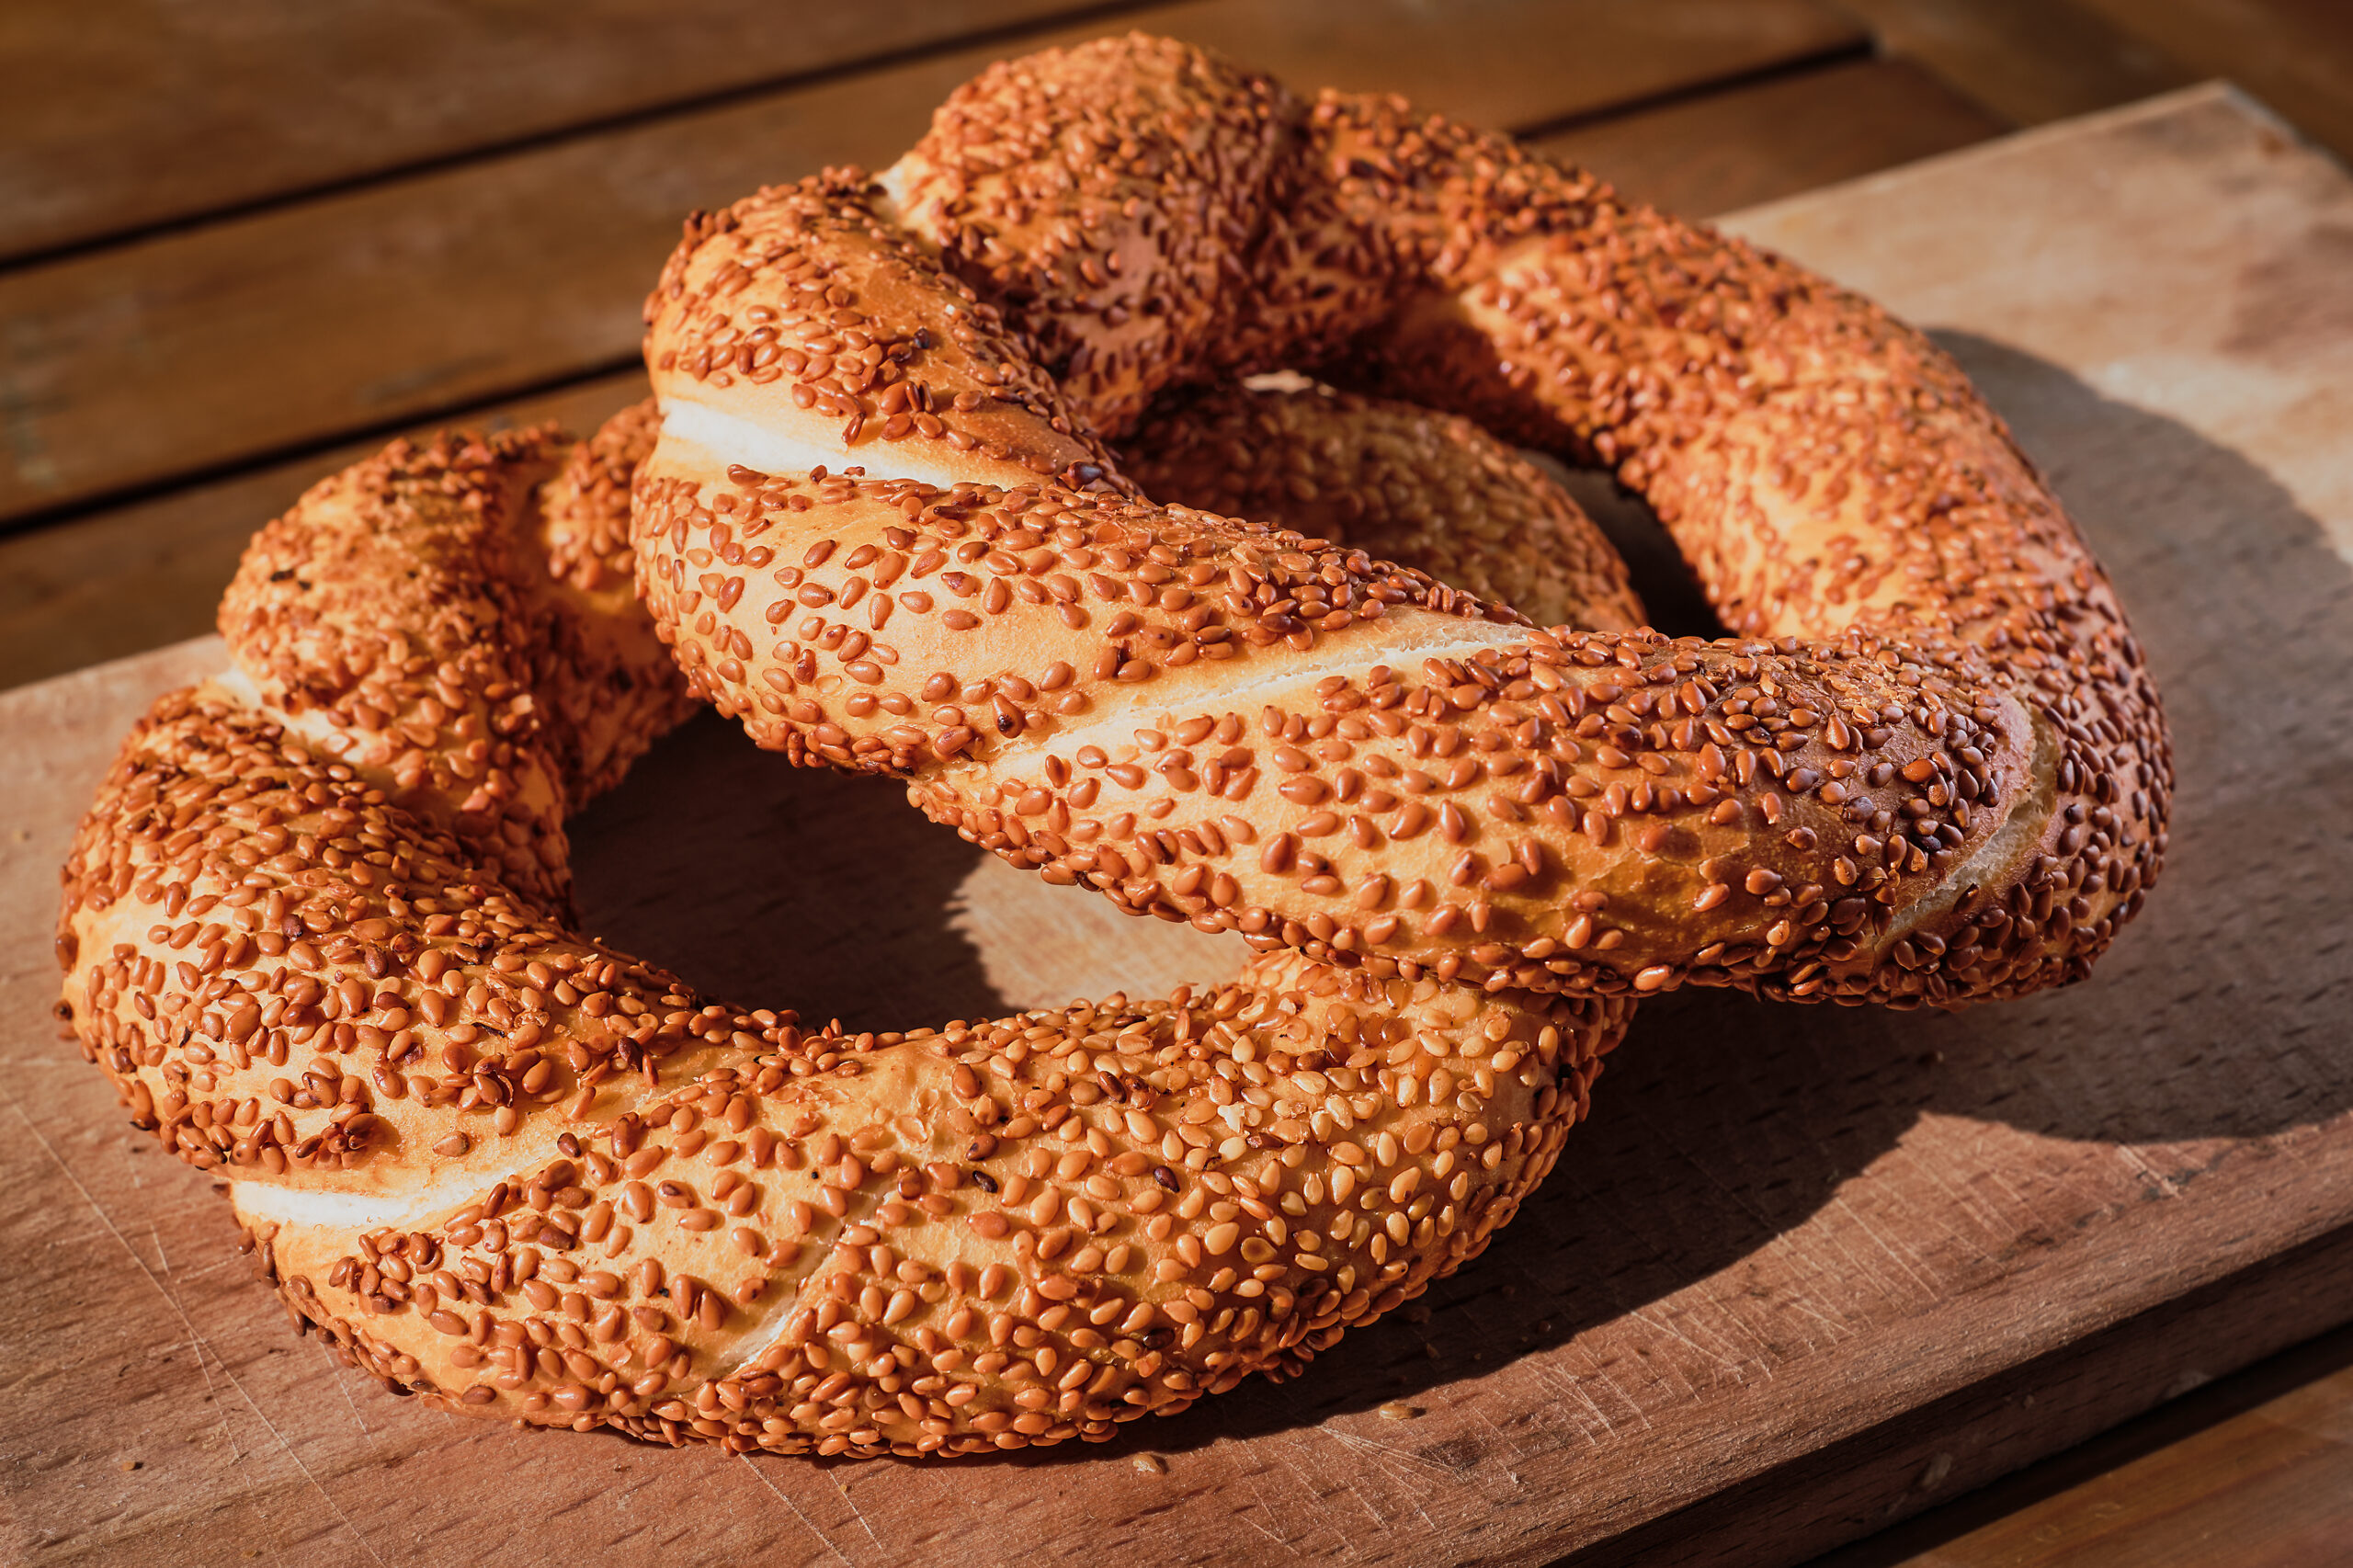 Freshly baked bagel with sesame seeds on a wooden table in the rays of sunlight. Turkish bagel simit close-up, fresh pastries for breakfast.